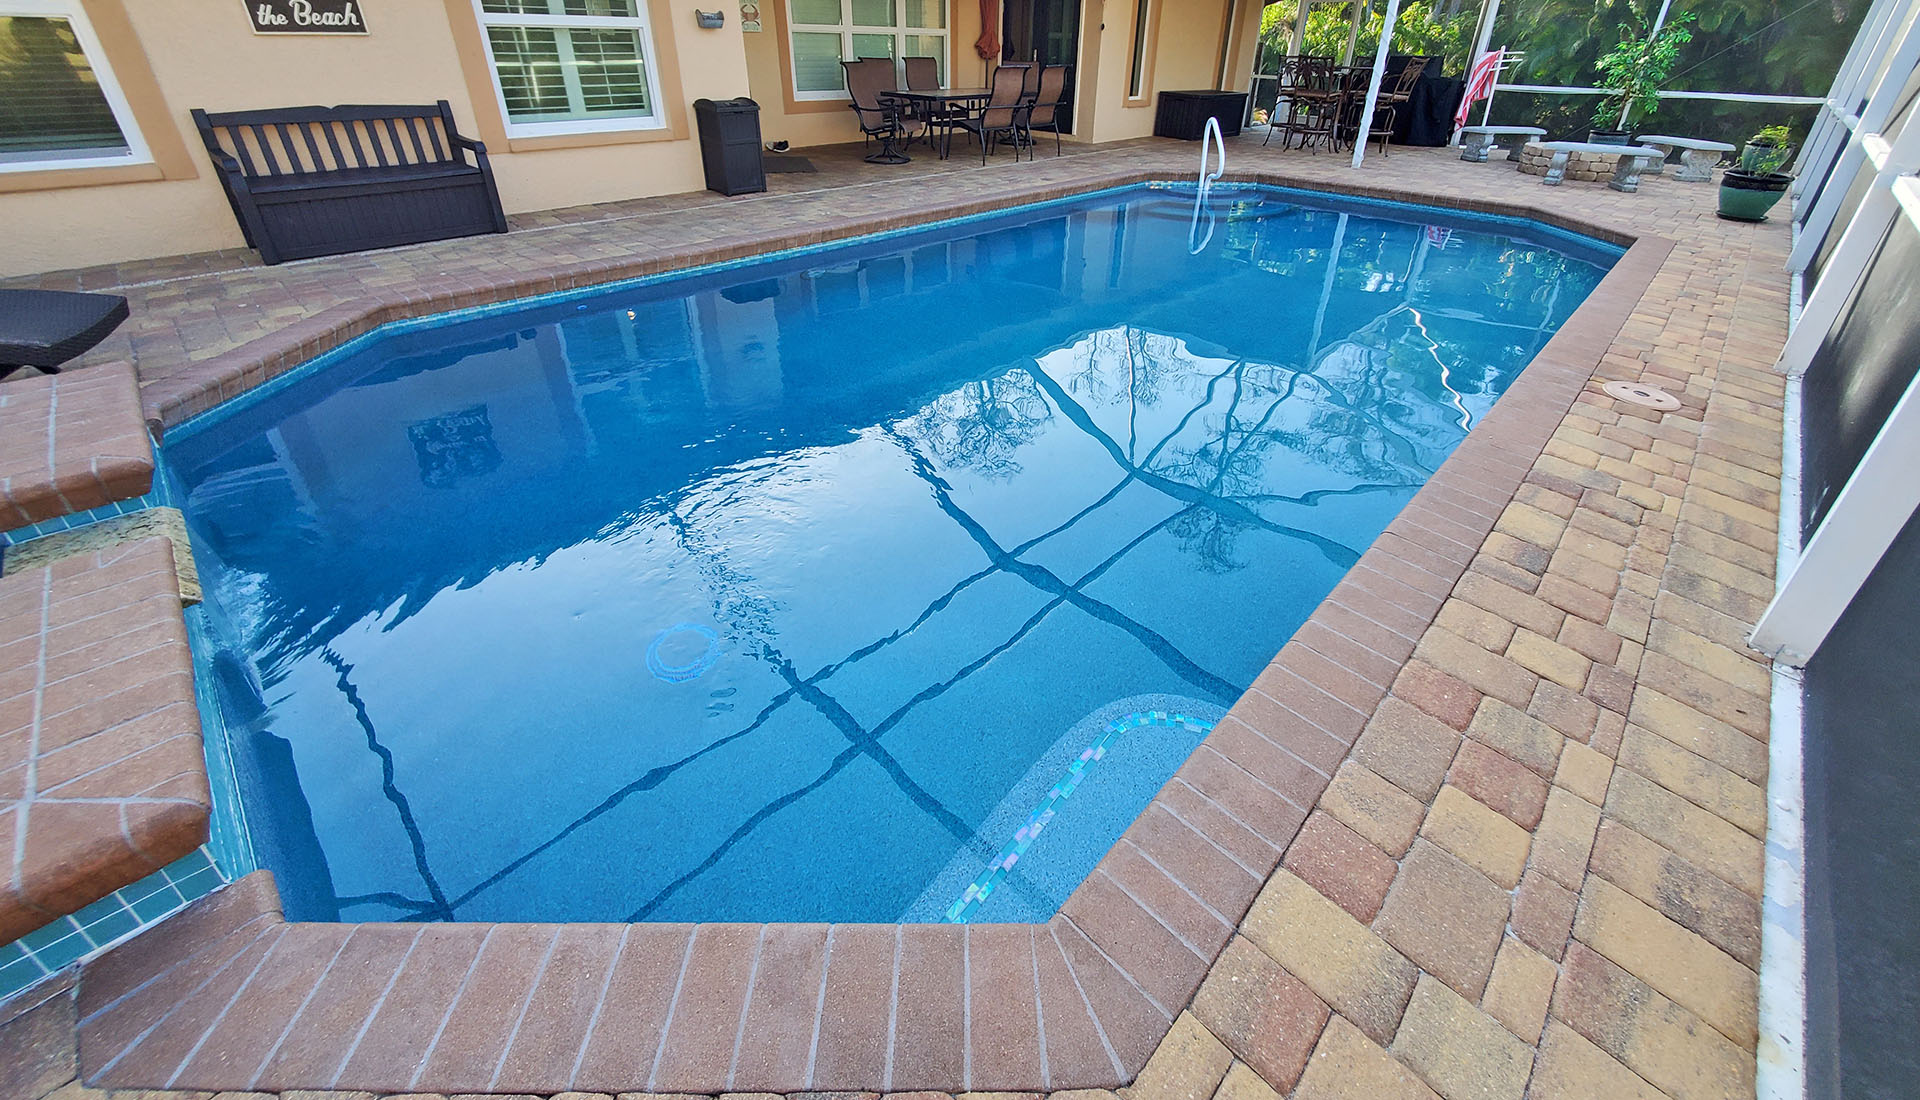 Cool blue pool with Cement Paver decking by Pool and Deck Concepts